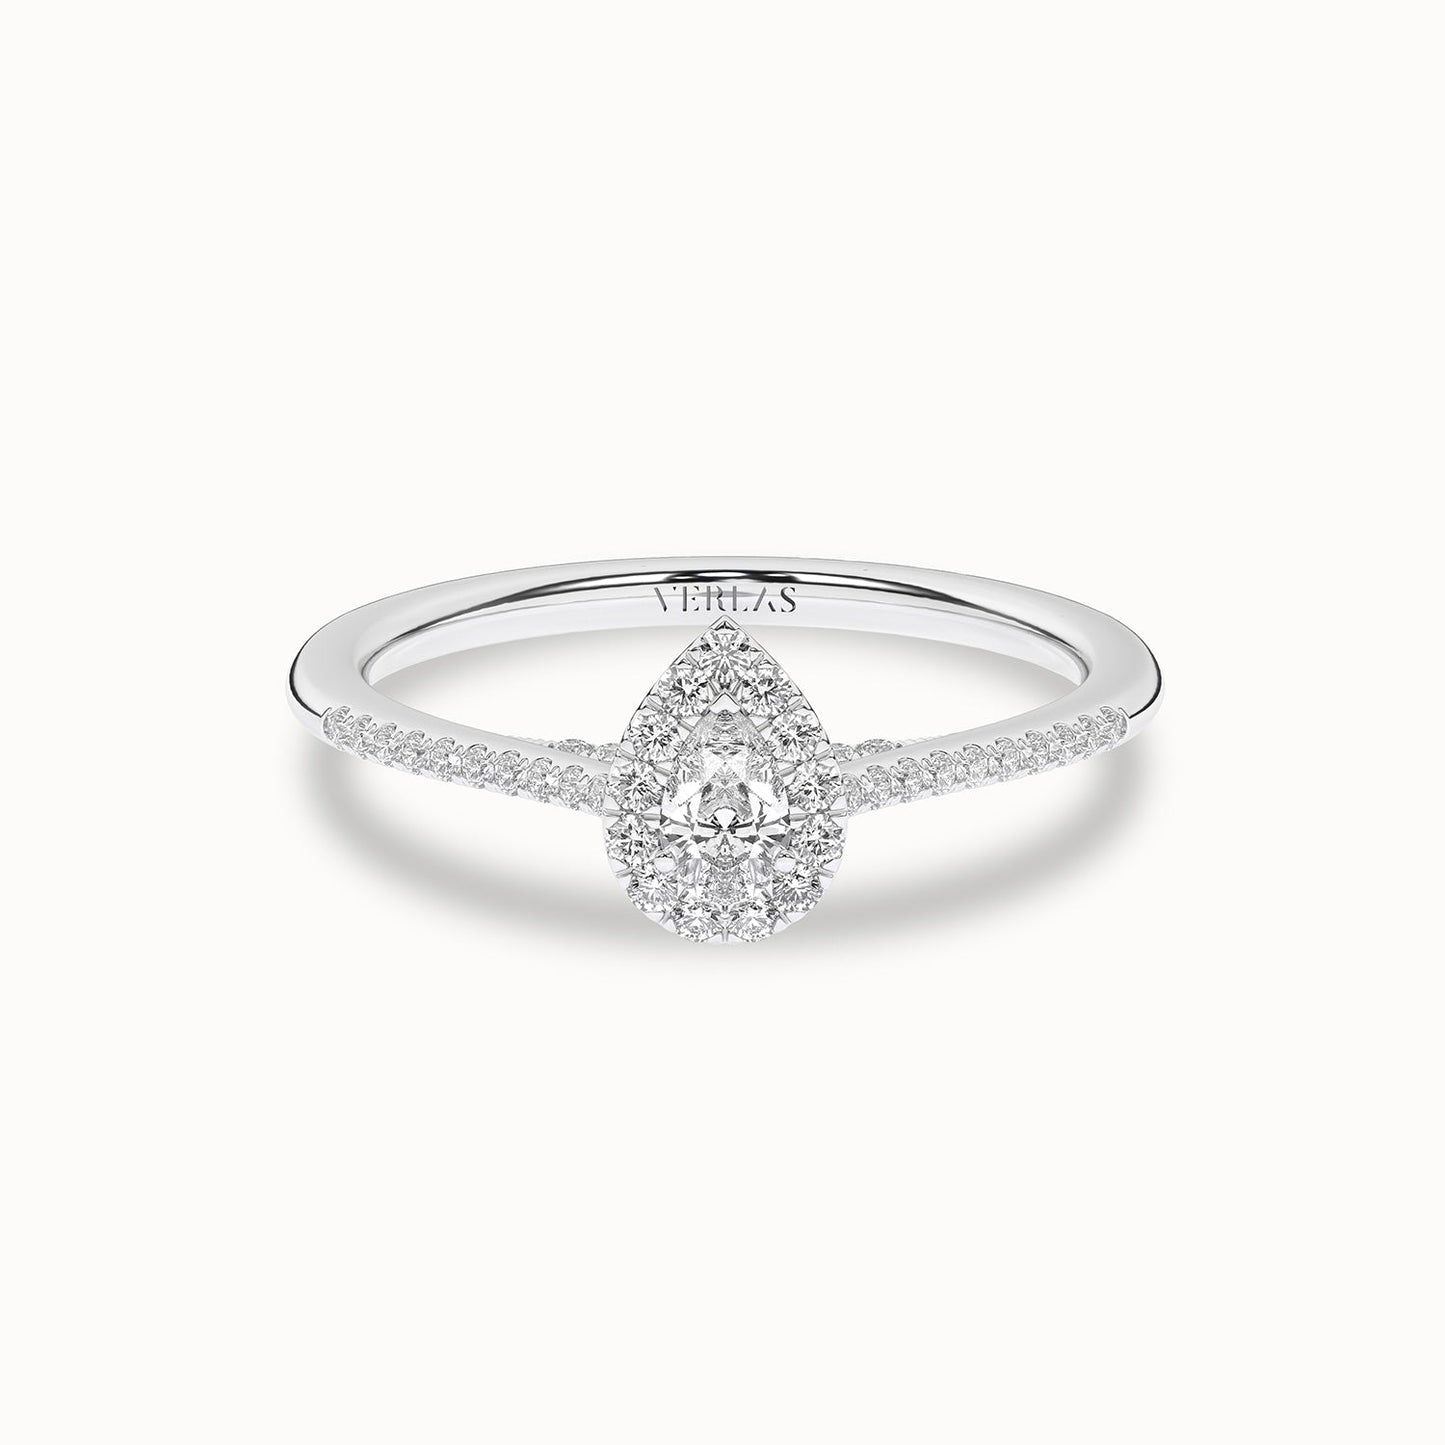 Signature Dewdrop Halo Ring_Product Angle_1/3Ct - 1